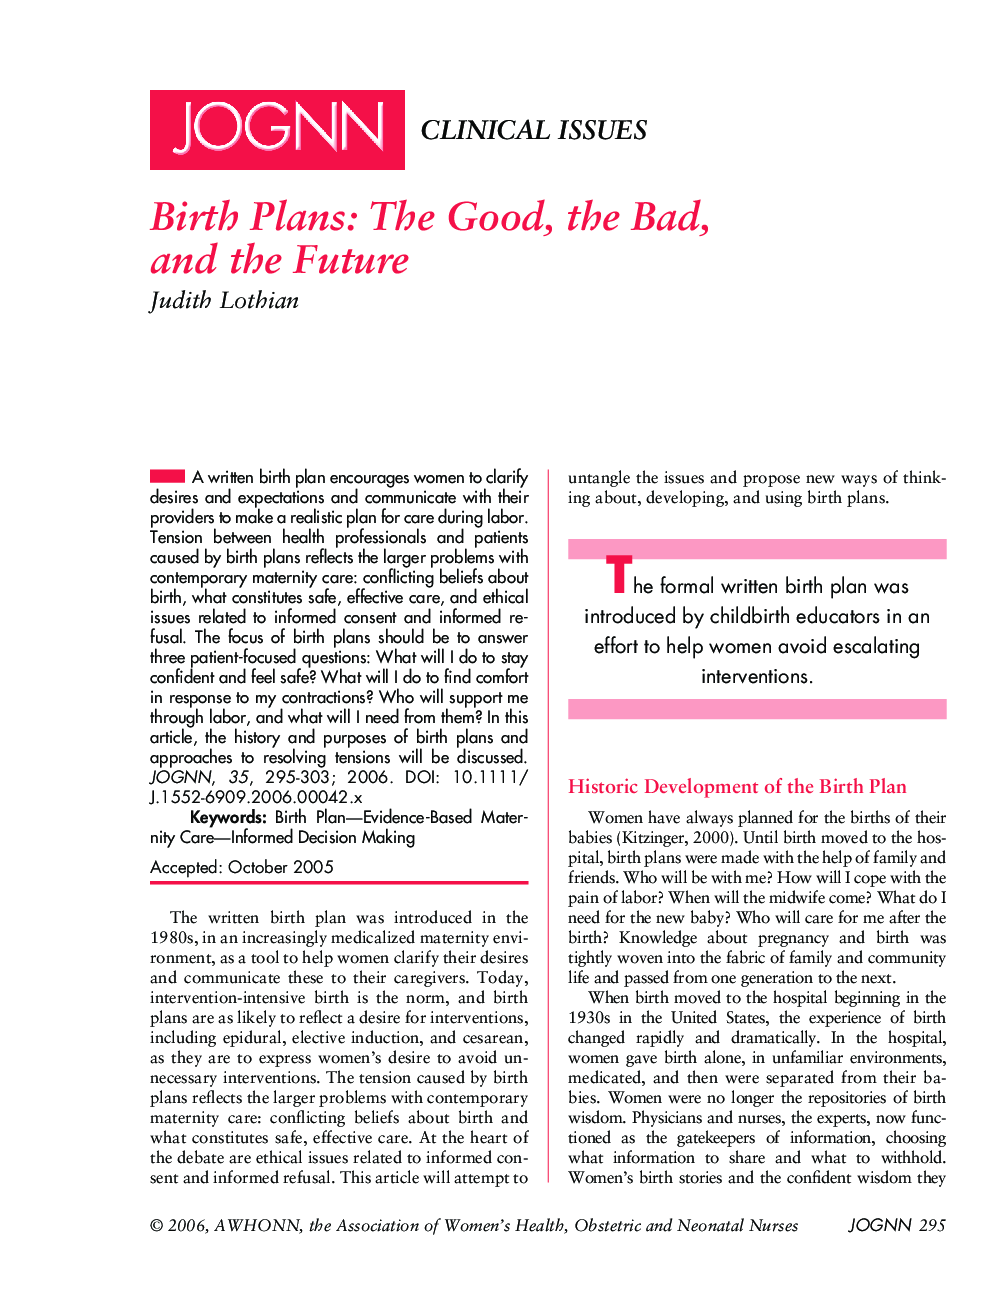 Birth Plans: The Good, the Bad, and the Future